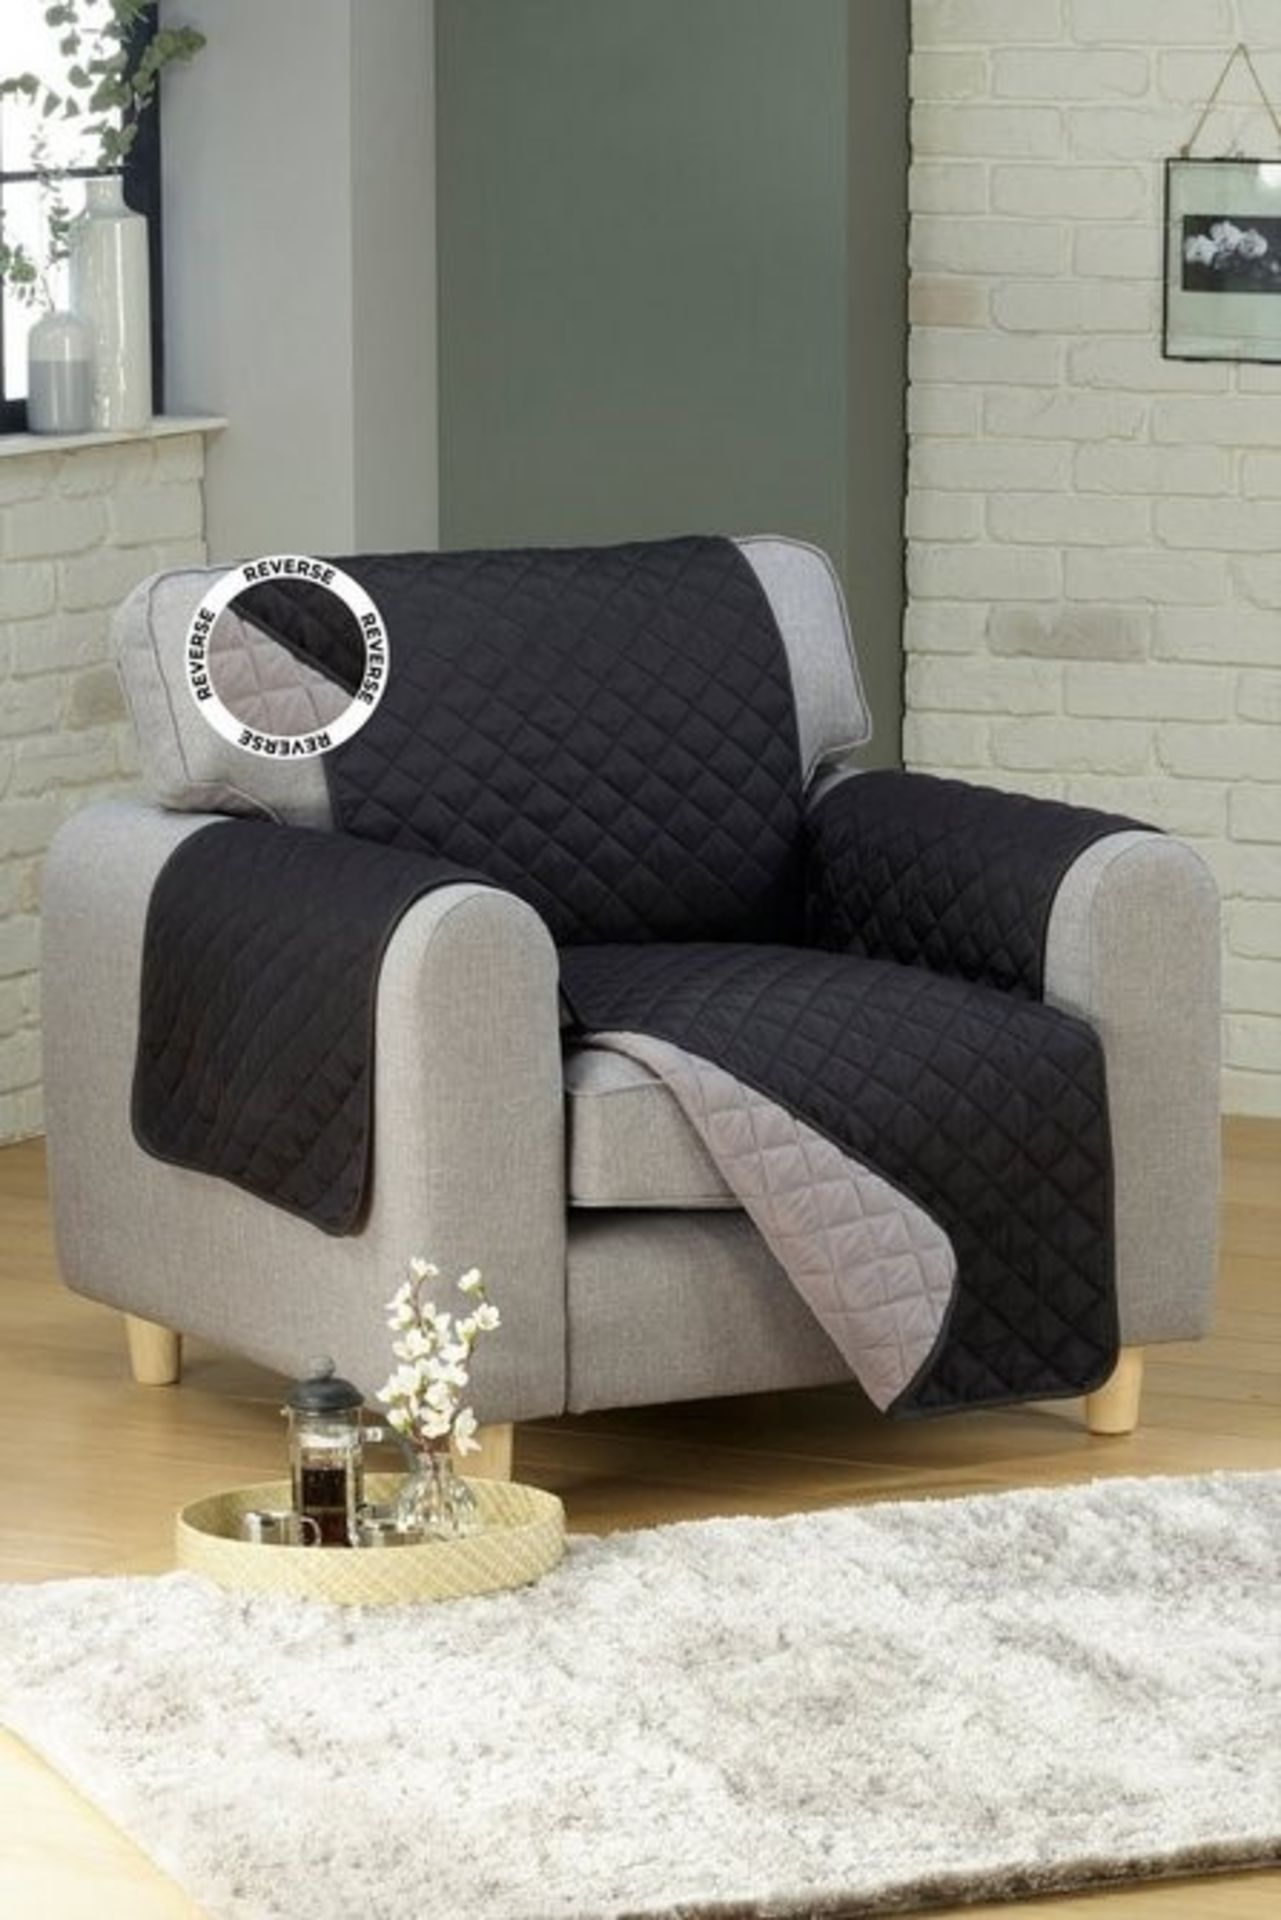 1 AS NEW BAGGED REVERSIBLE SOFA PROTECTOR IN BLACK AND GREY (PUBLIC VIEWING AVAILABLE)